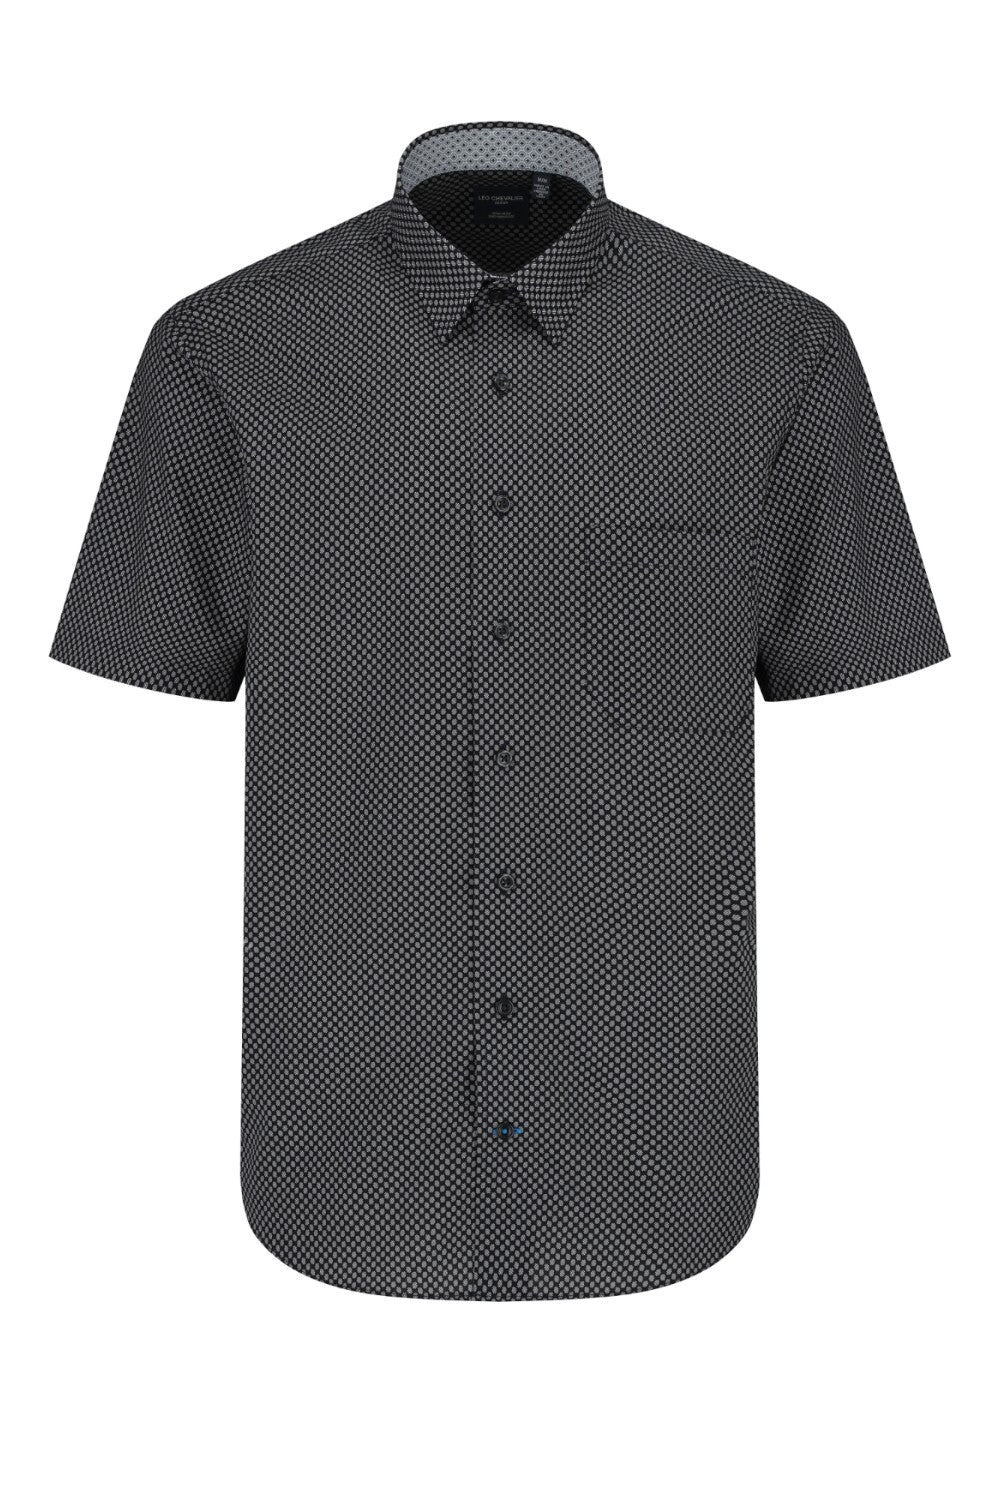 This Leo Chevalier Men's Short Sleeve is crafted from 100% cotton which provides excellent breathability and is non-iron for easy maintenance. The hidden button down collar and tall fit provide a tailored look for any occasion.